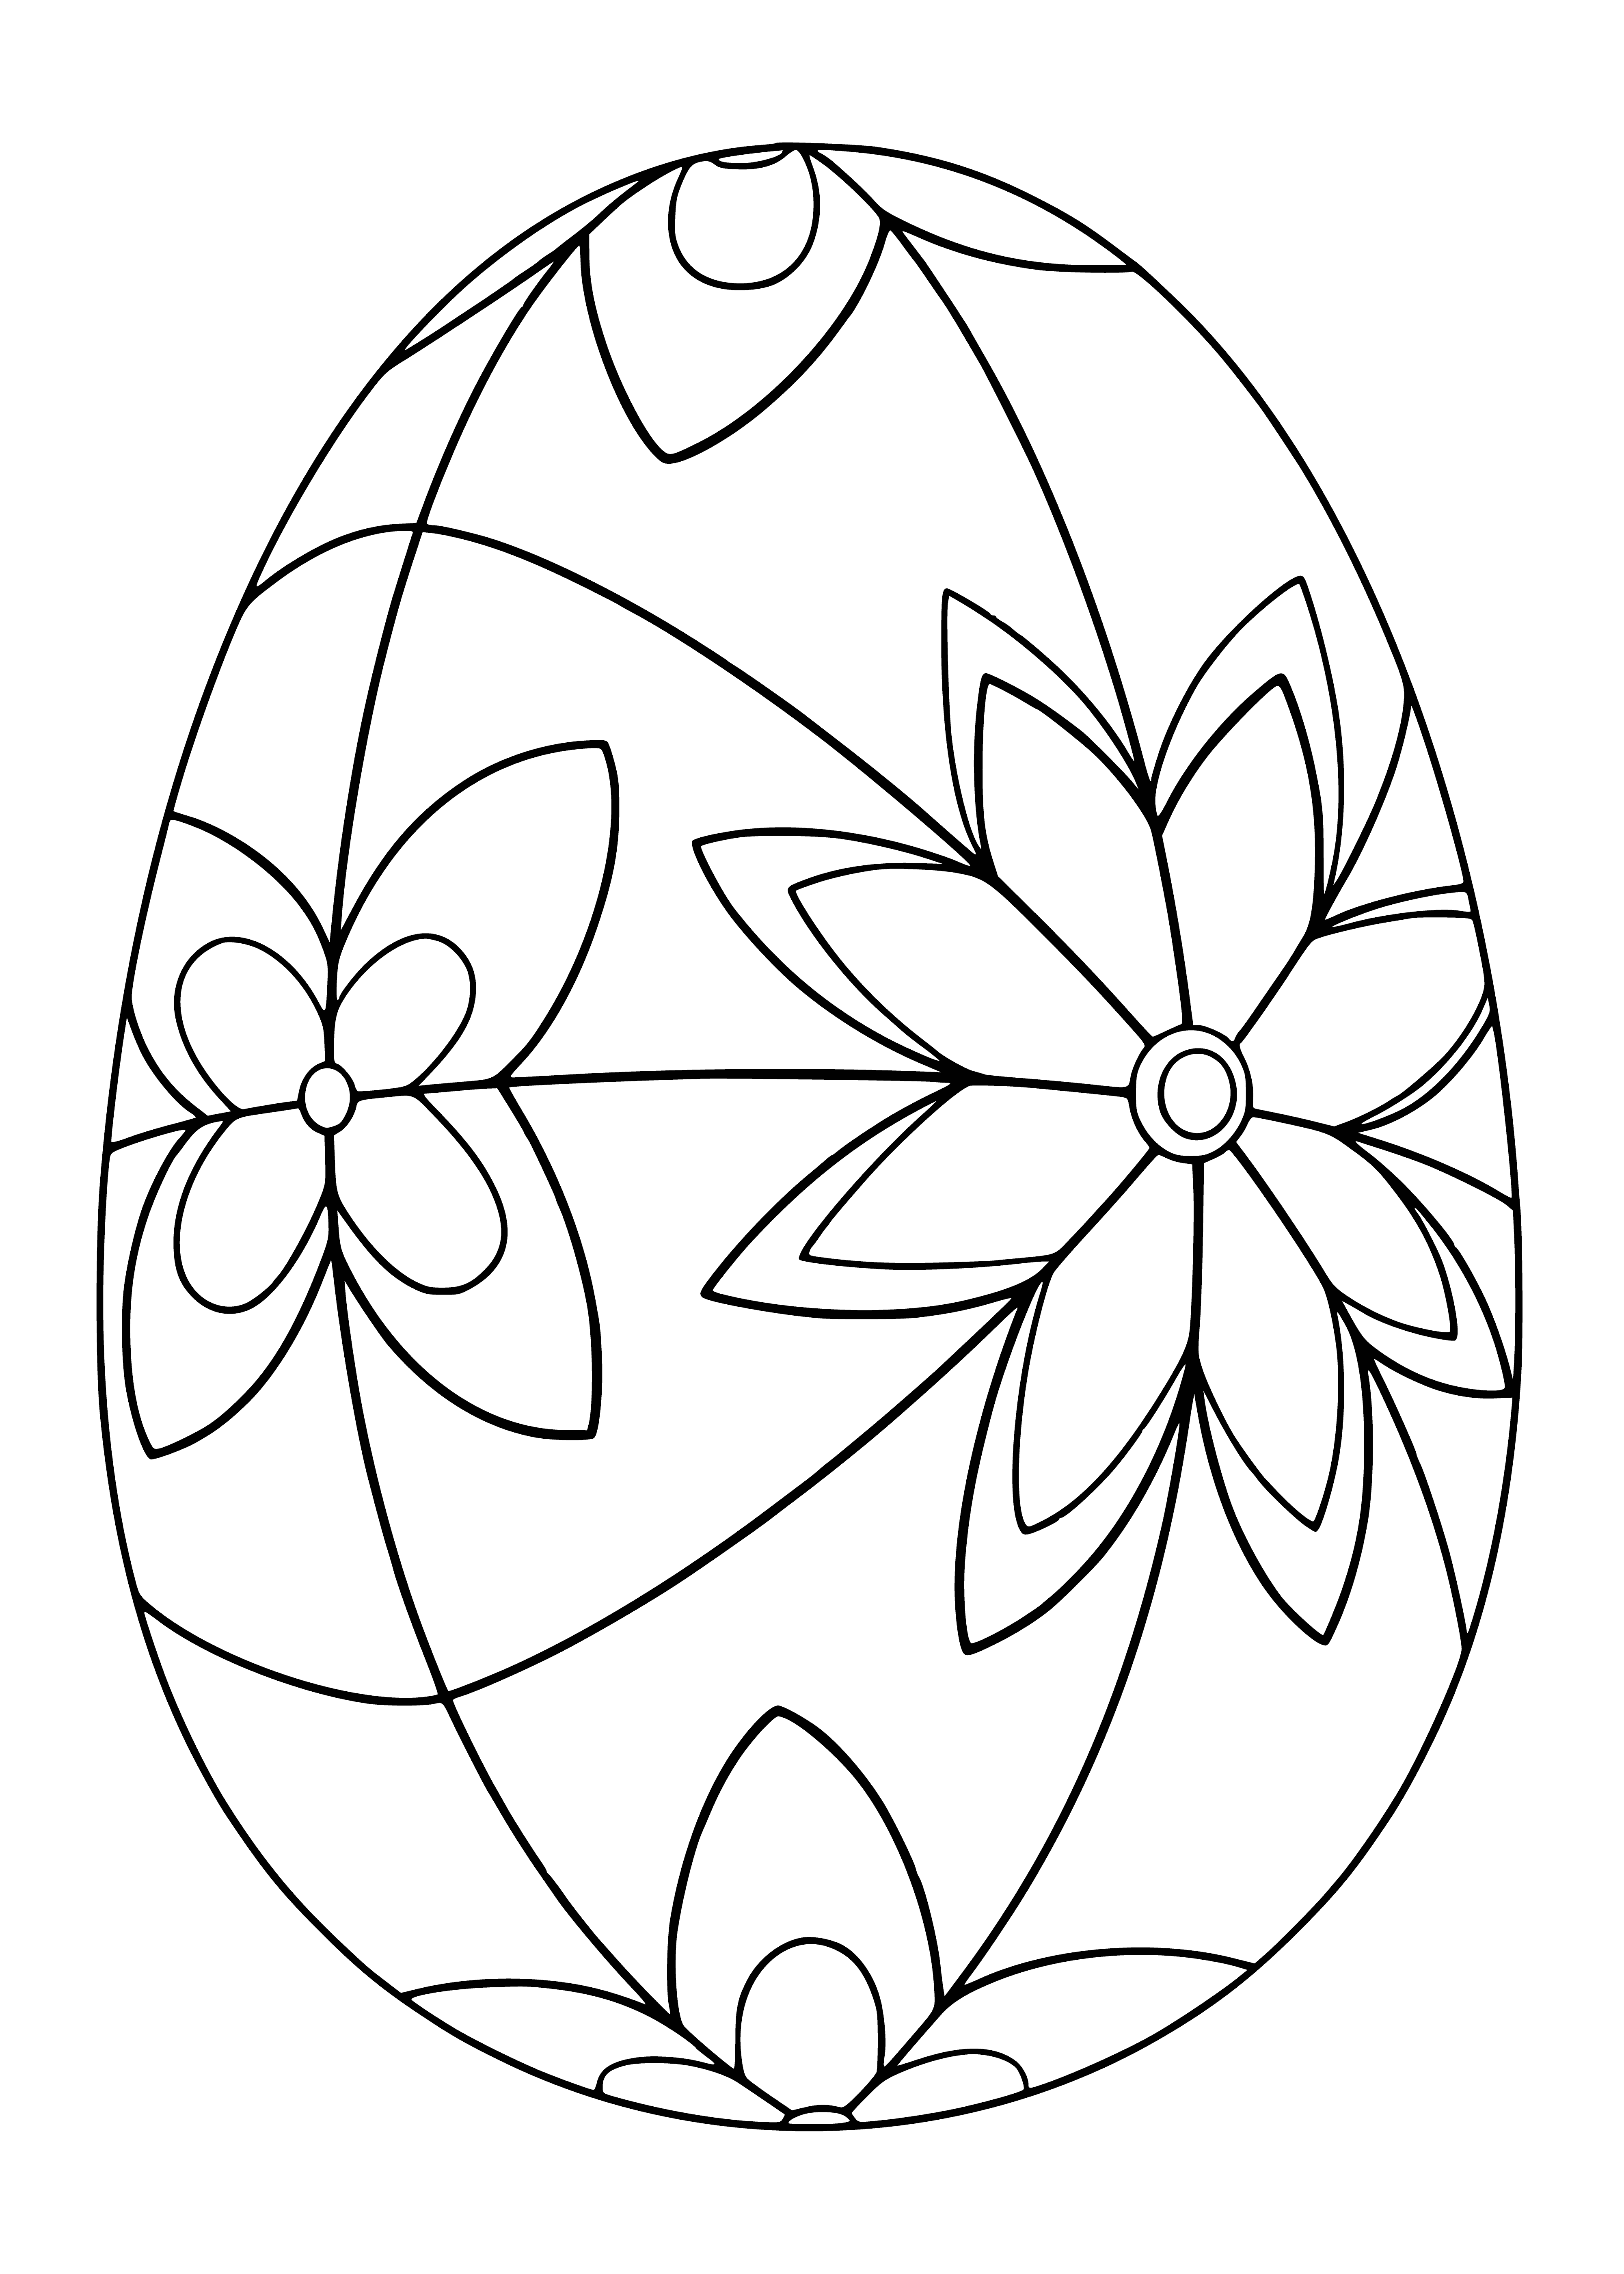 coloring page: 3 Easter eggs- brown, blue w/ yellow chick- decorated w/ white bunny shapes.